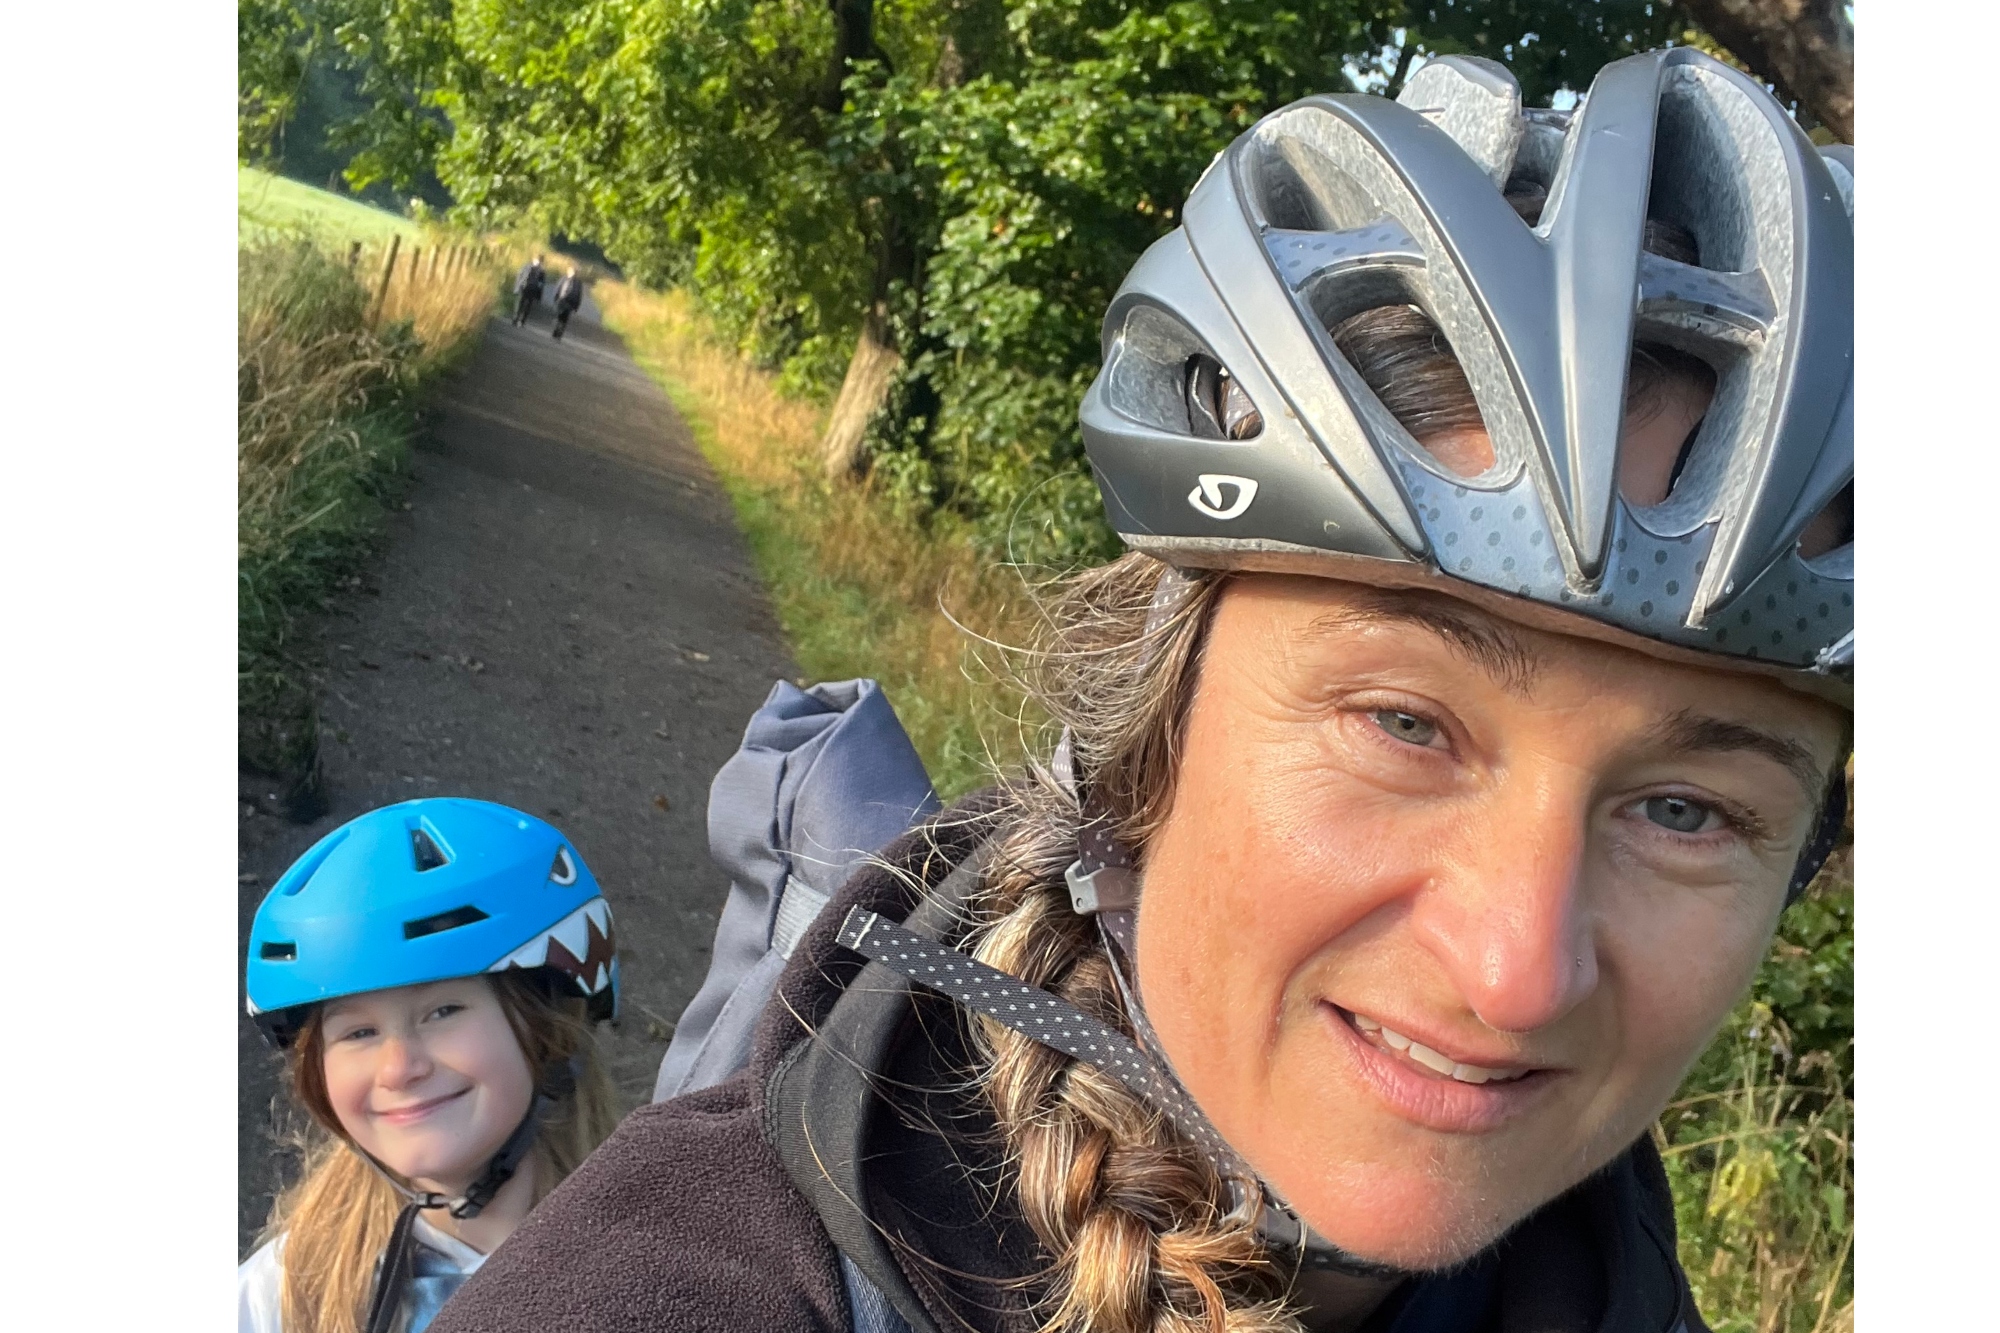 A woman is looking at the camara smiling with a helmet on. In the background is a child with a blue helmet. They are on a cargo bike